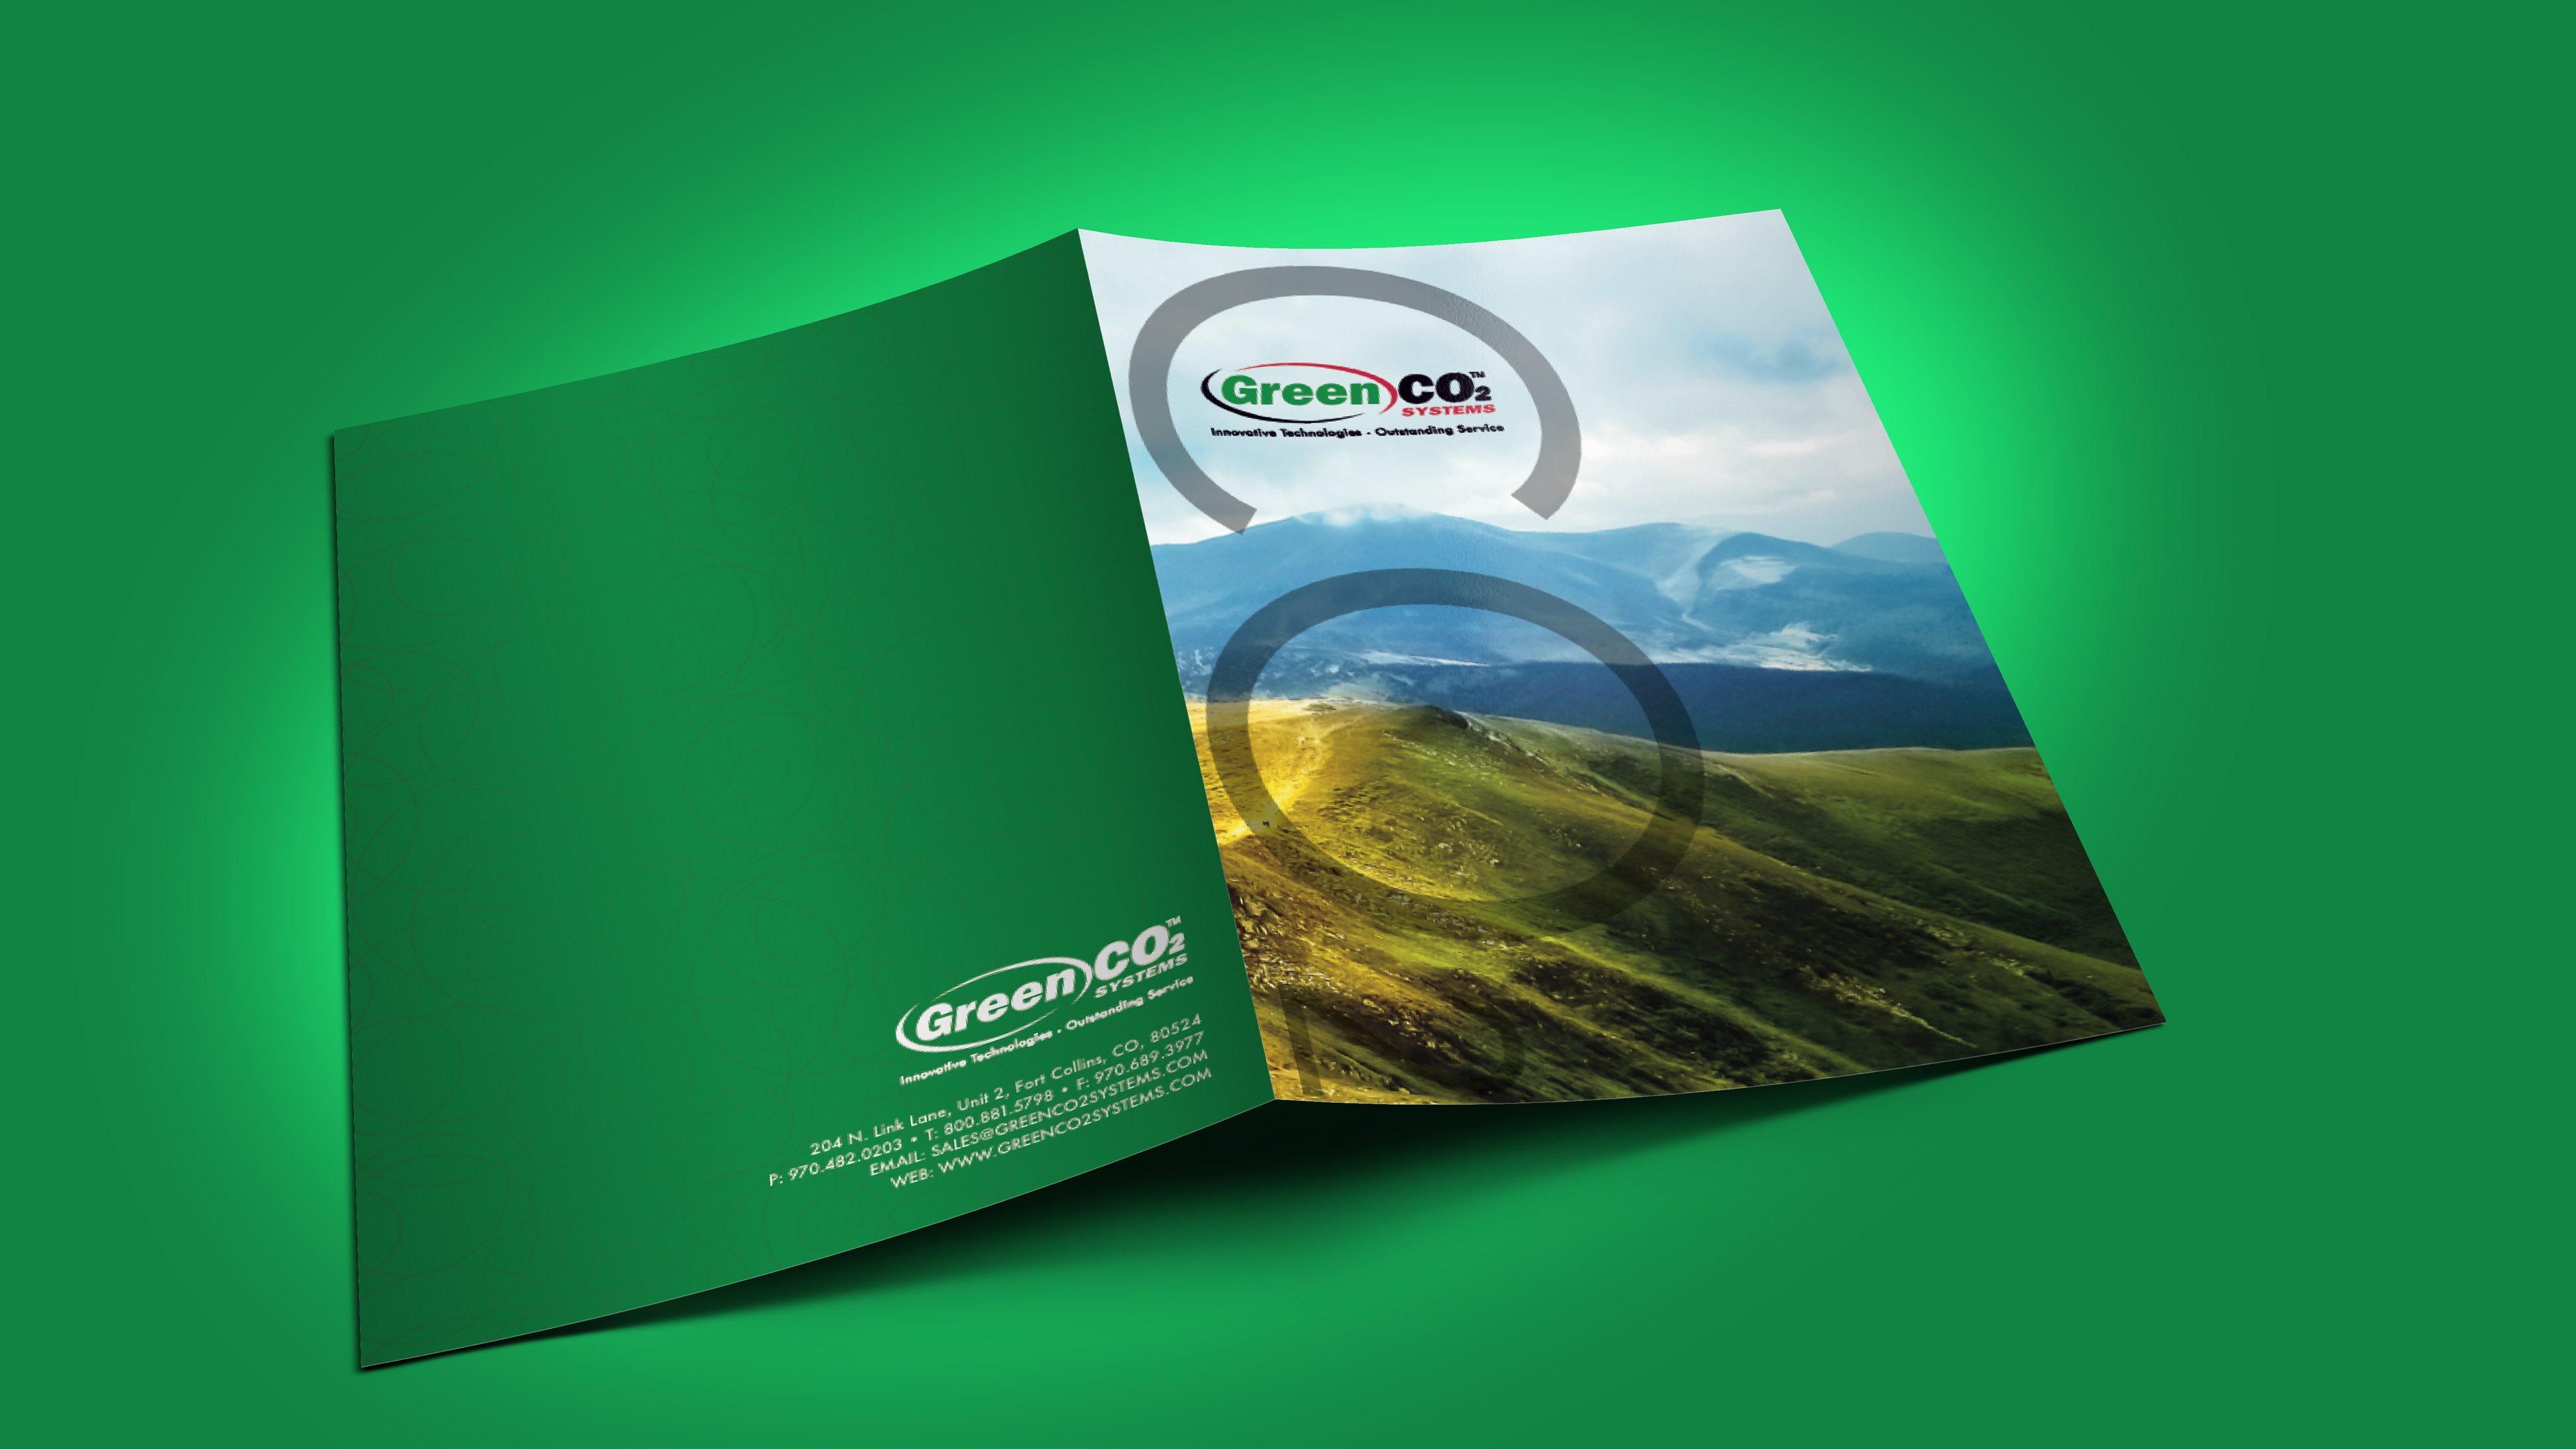 green co2 systems folder mockup front cover